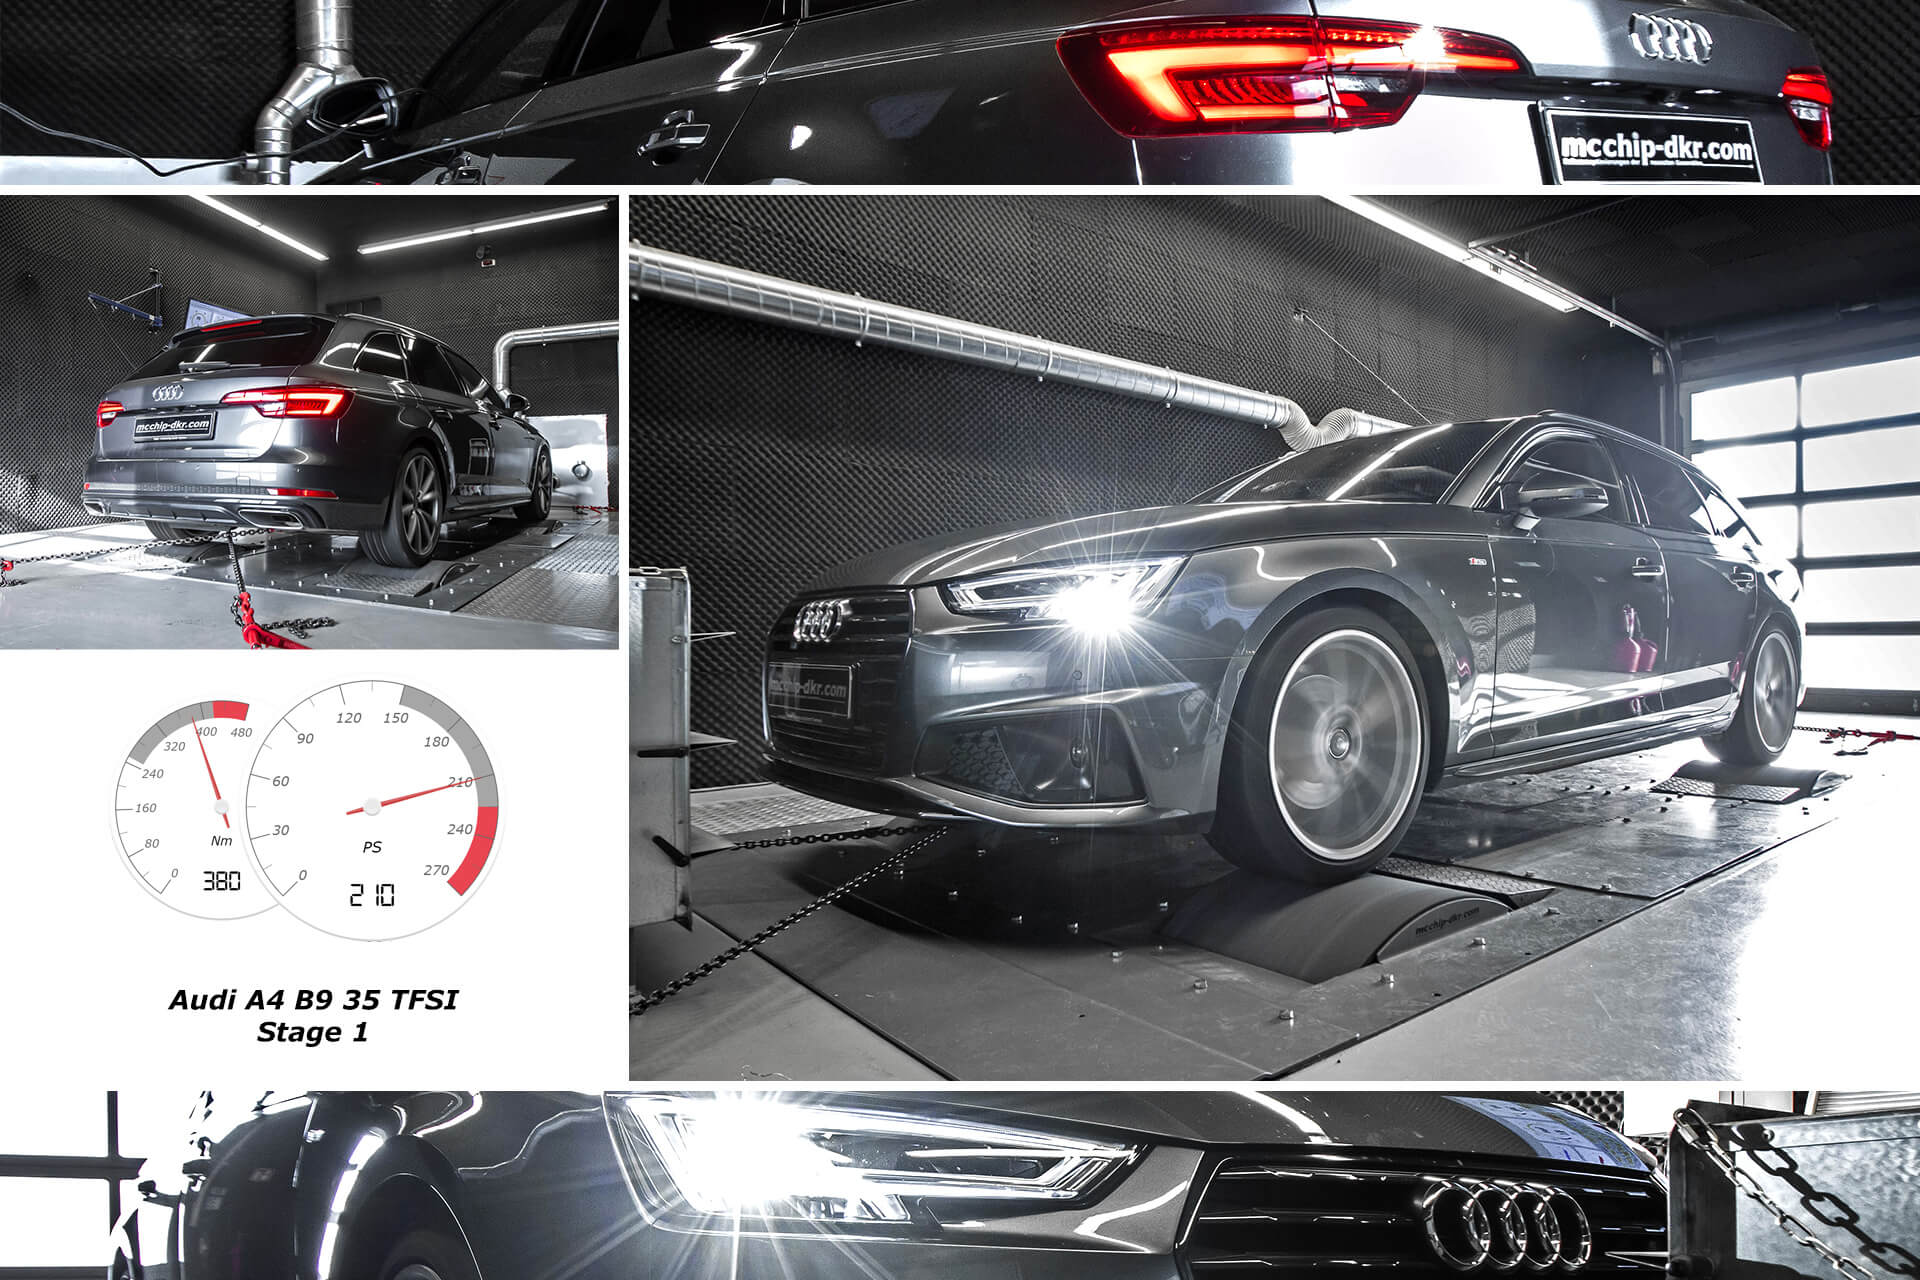 Chiptuning Chiptuning for Audi A4 B8